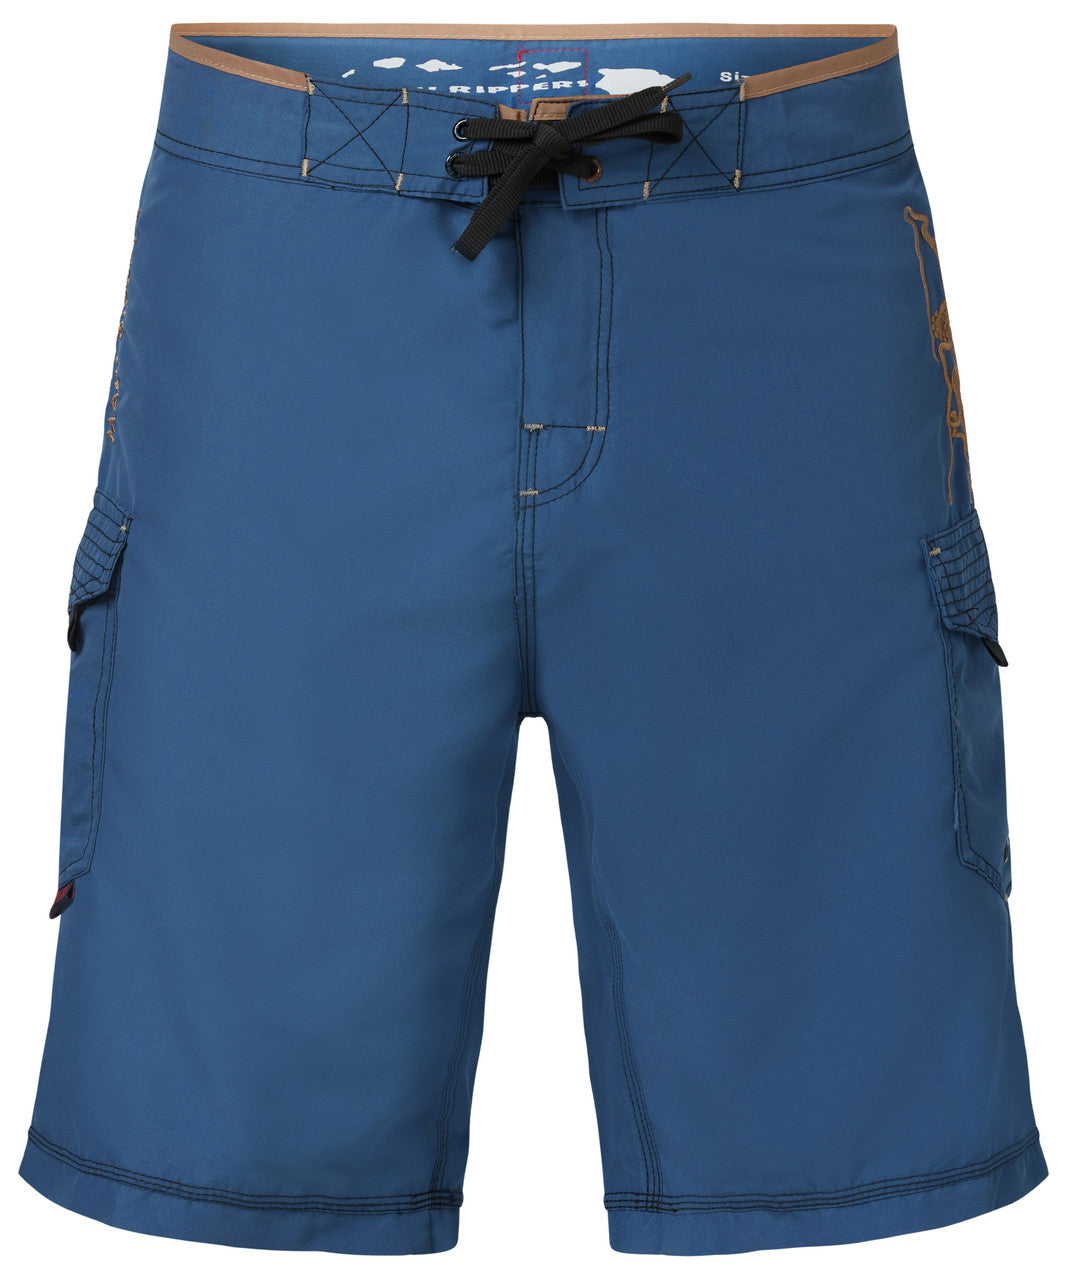 Hawaiian Octo Tako Olive Men's Boardshort with fishing pocket for knife or plyers for the perfect fishing boardshort